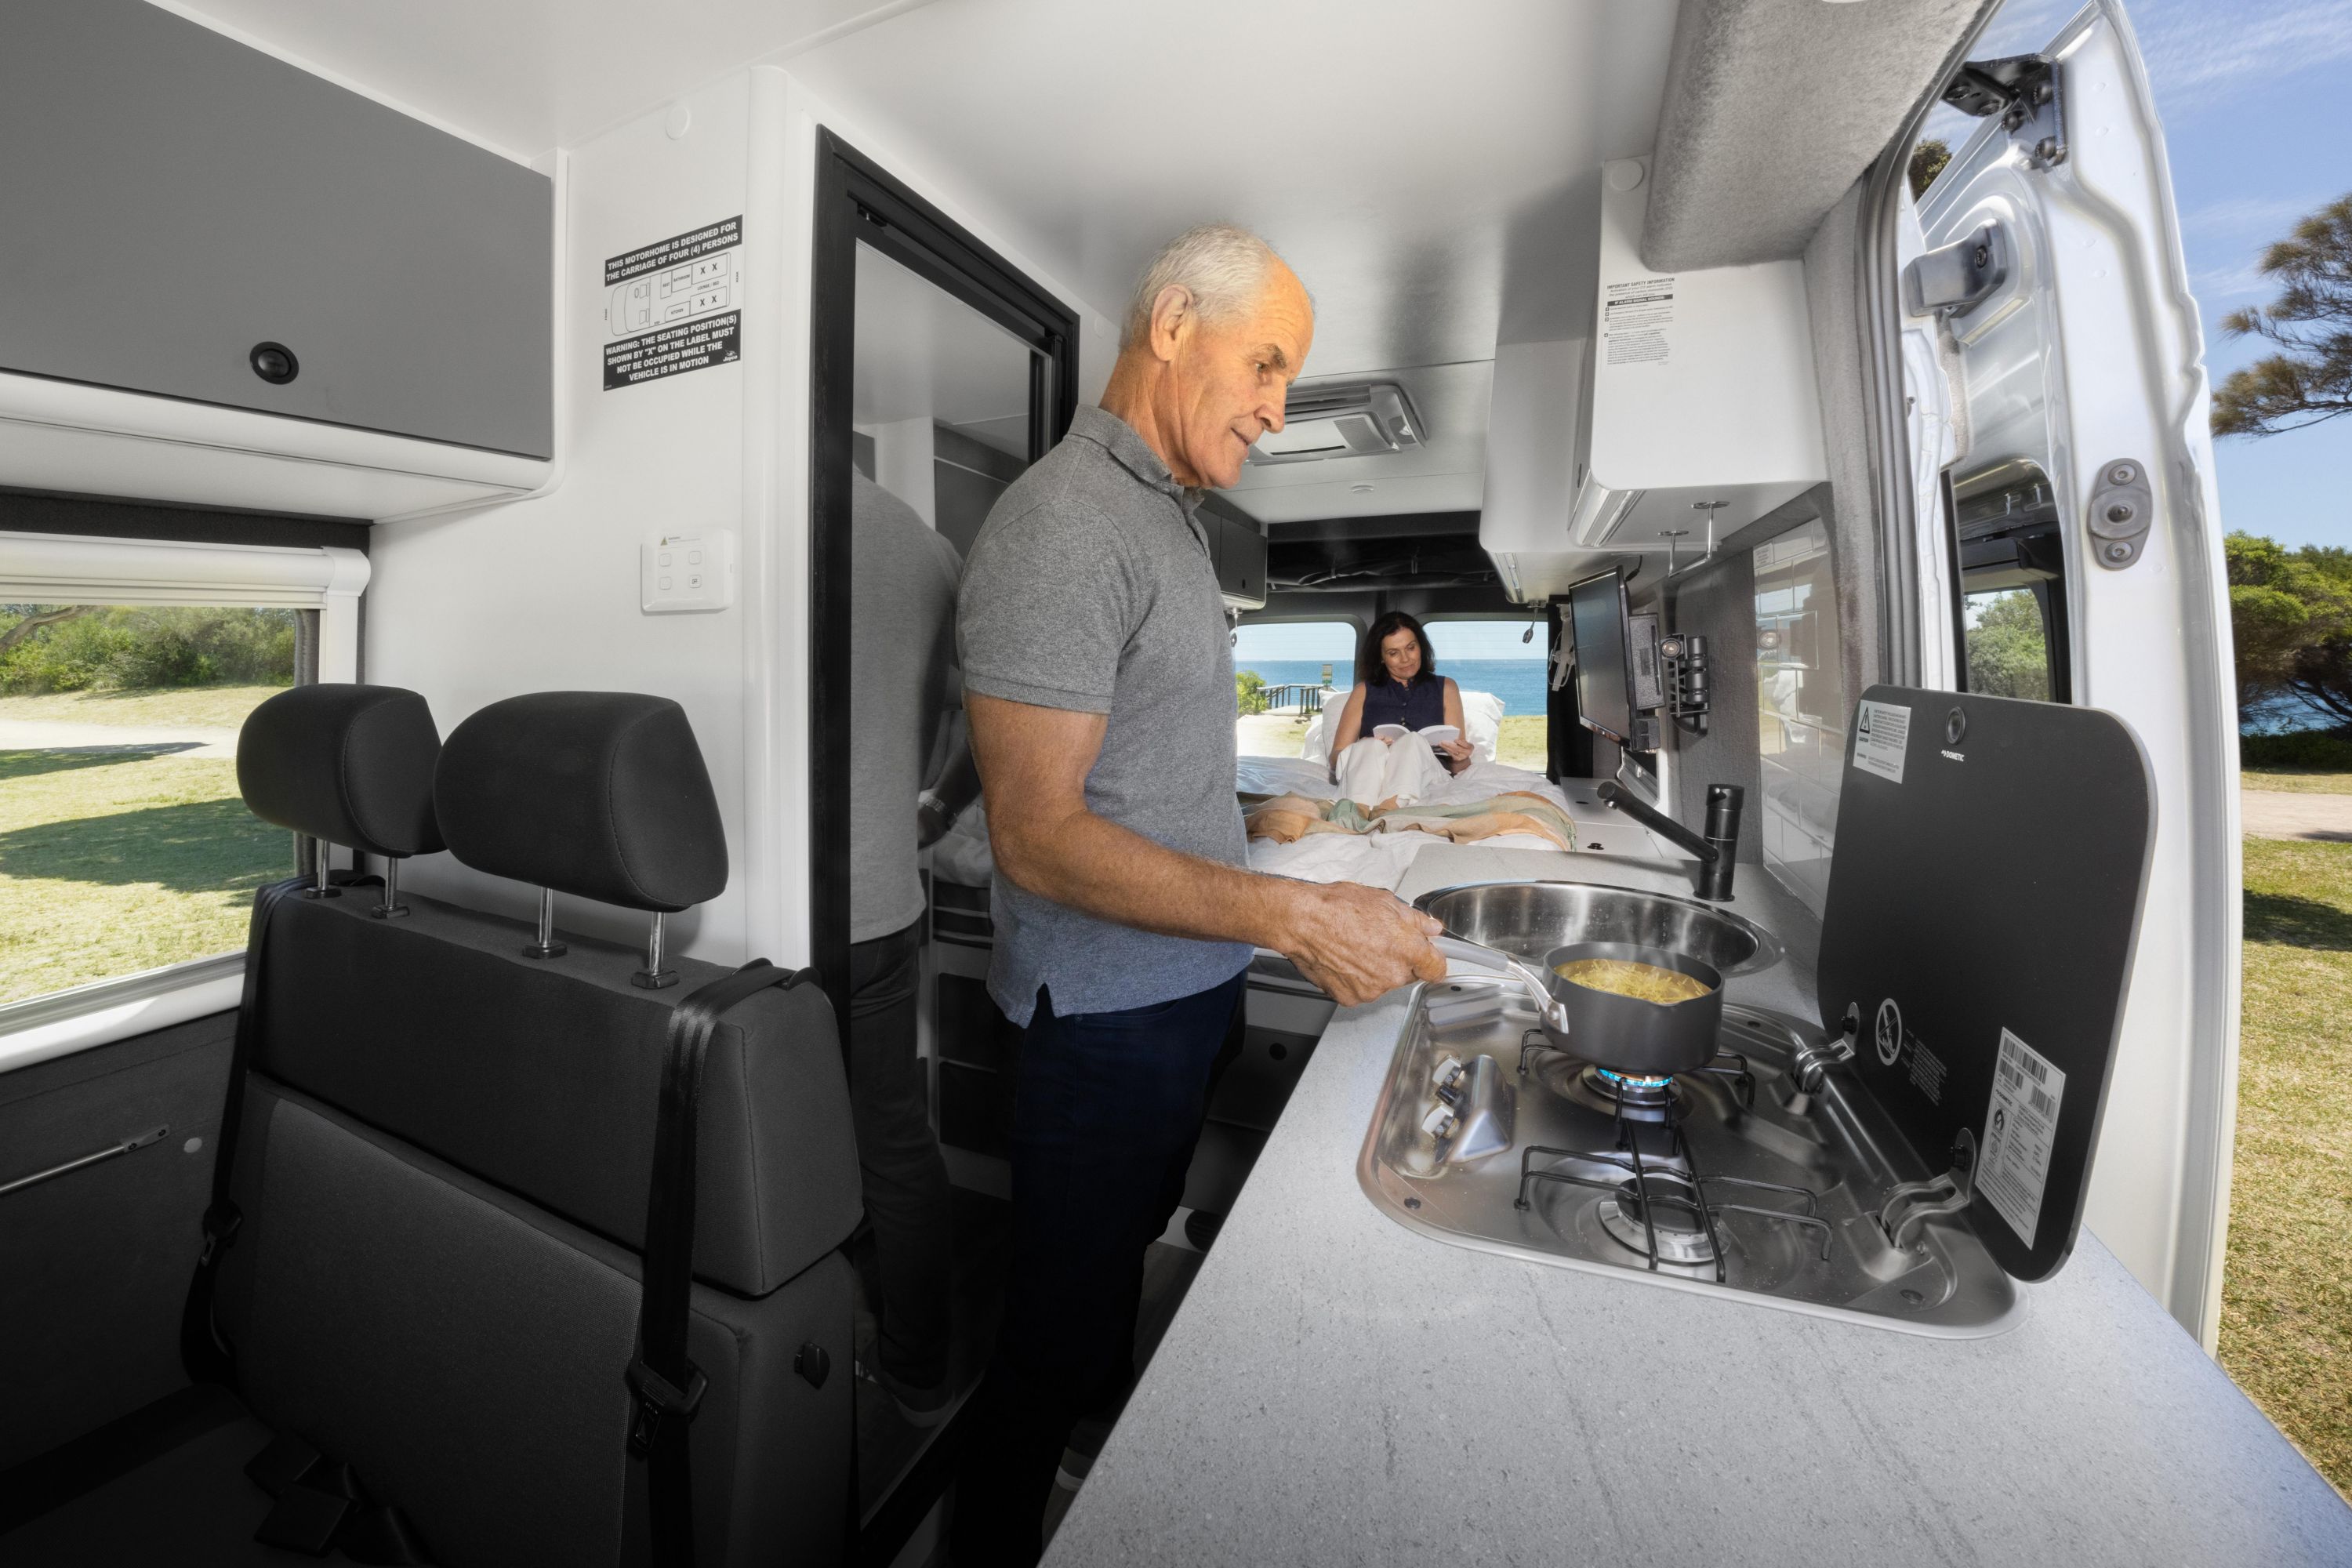 android, 2024 volkswagen crafter kampervan by jayco price and specs